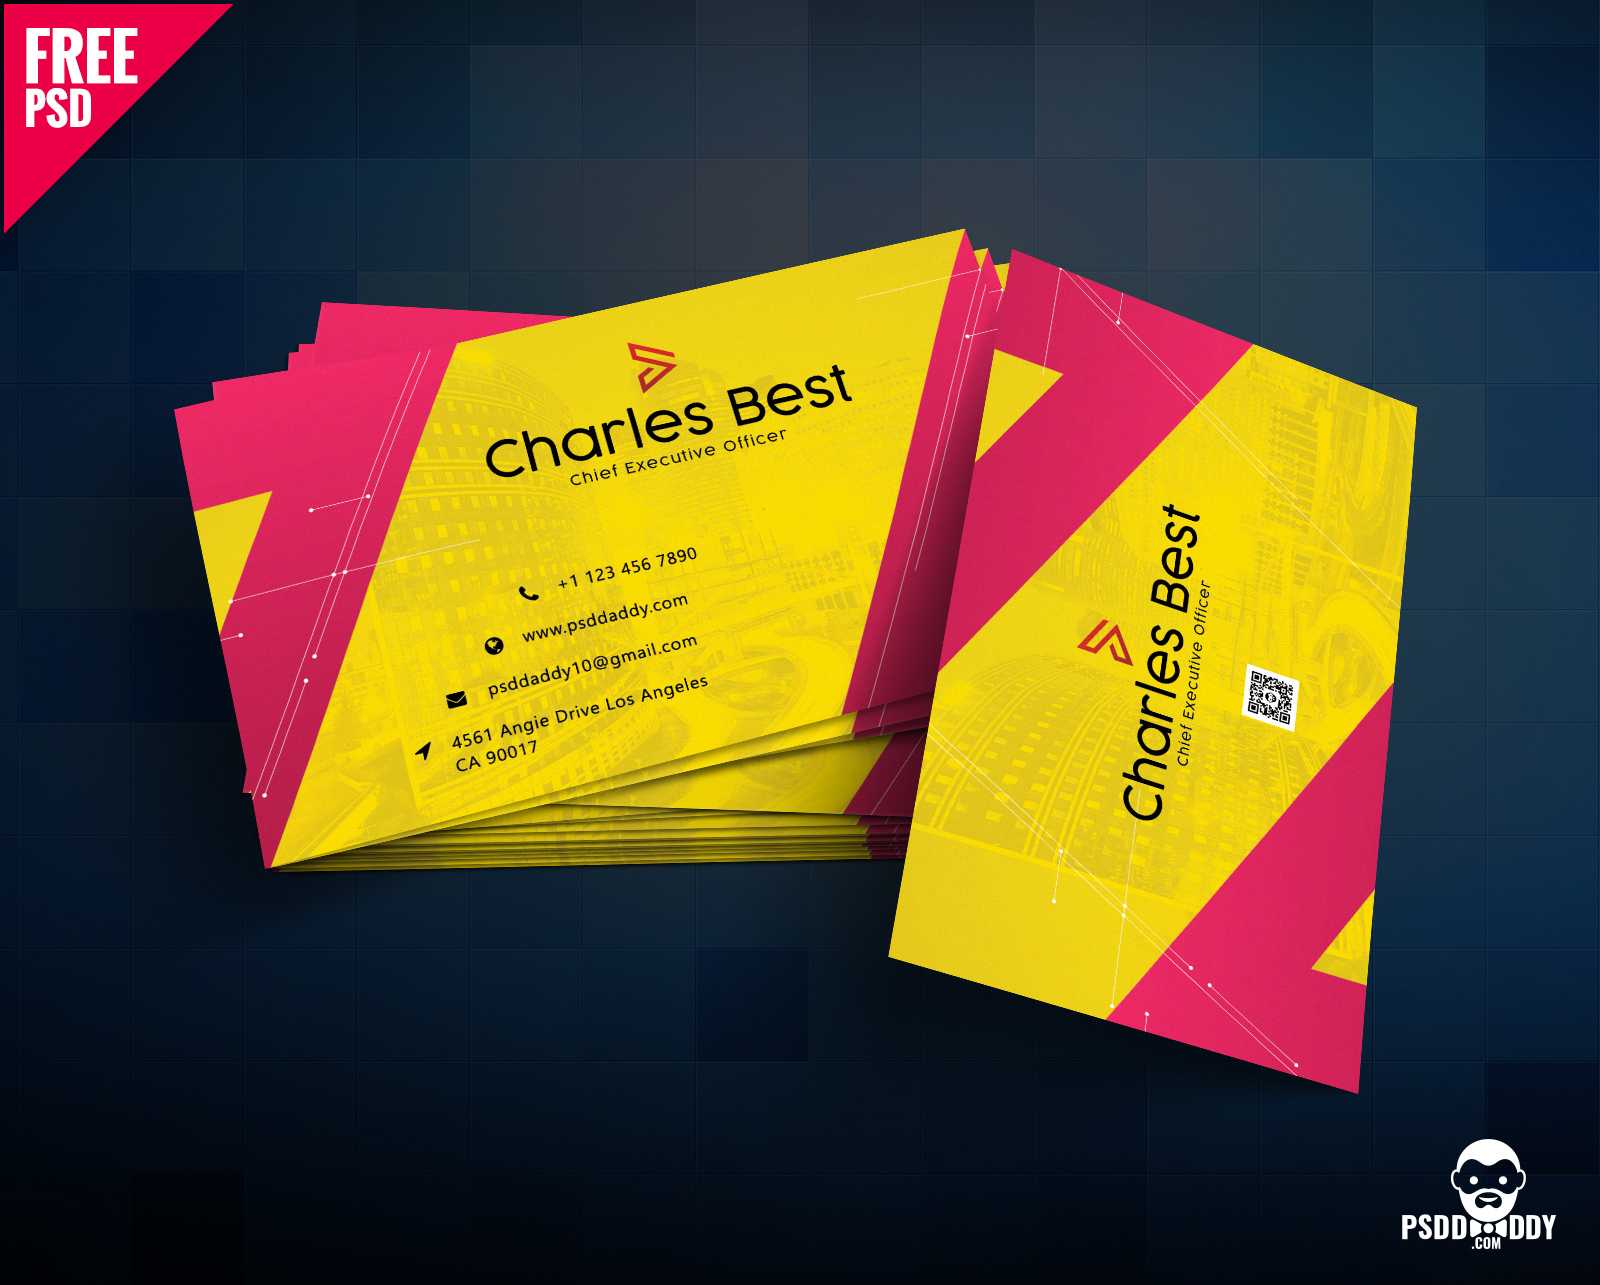 Download] Creative Business Card Free Psd | Psddaddy In Business Card Maker Template